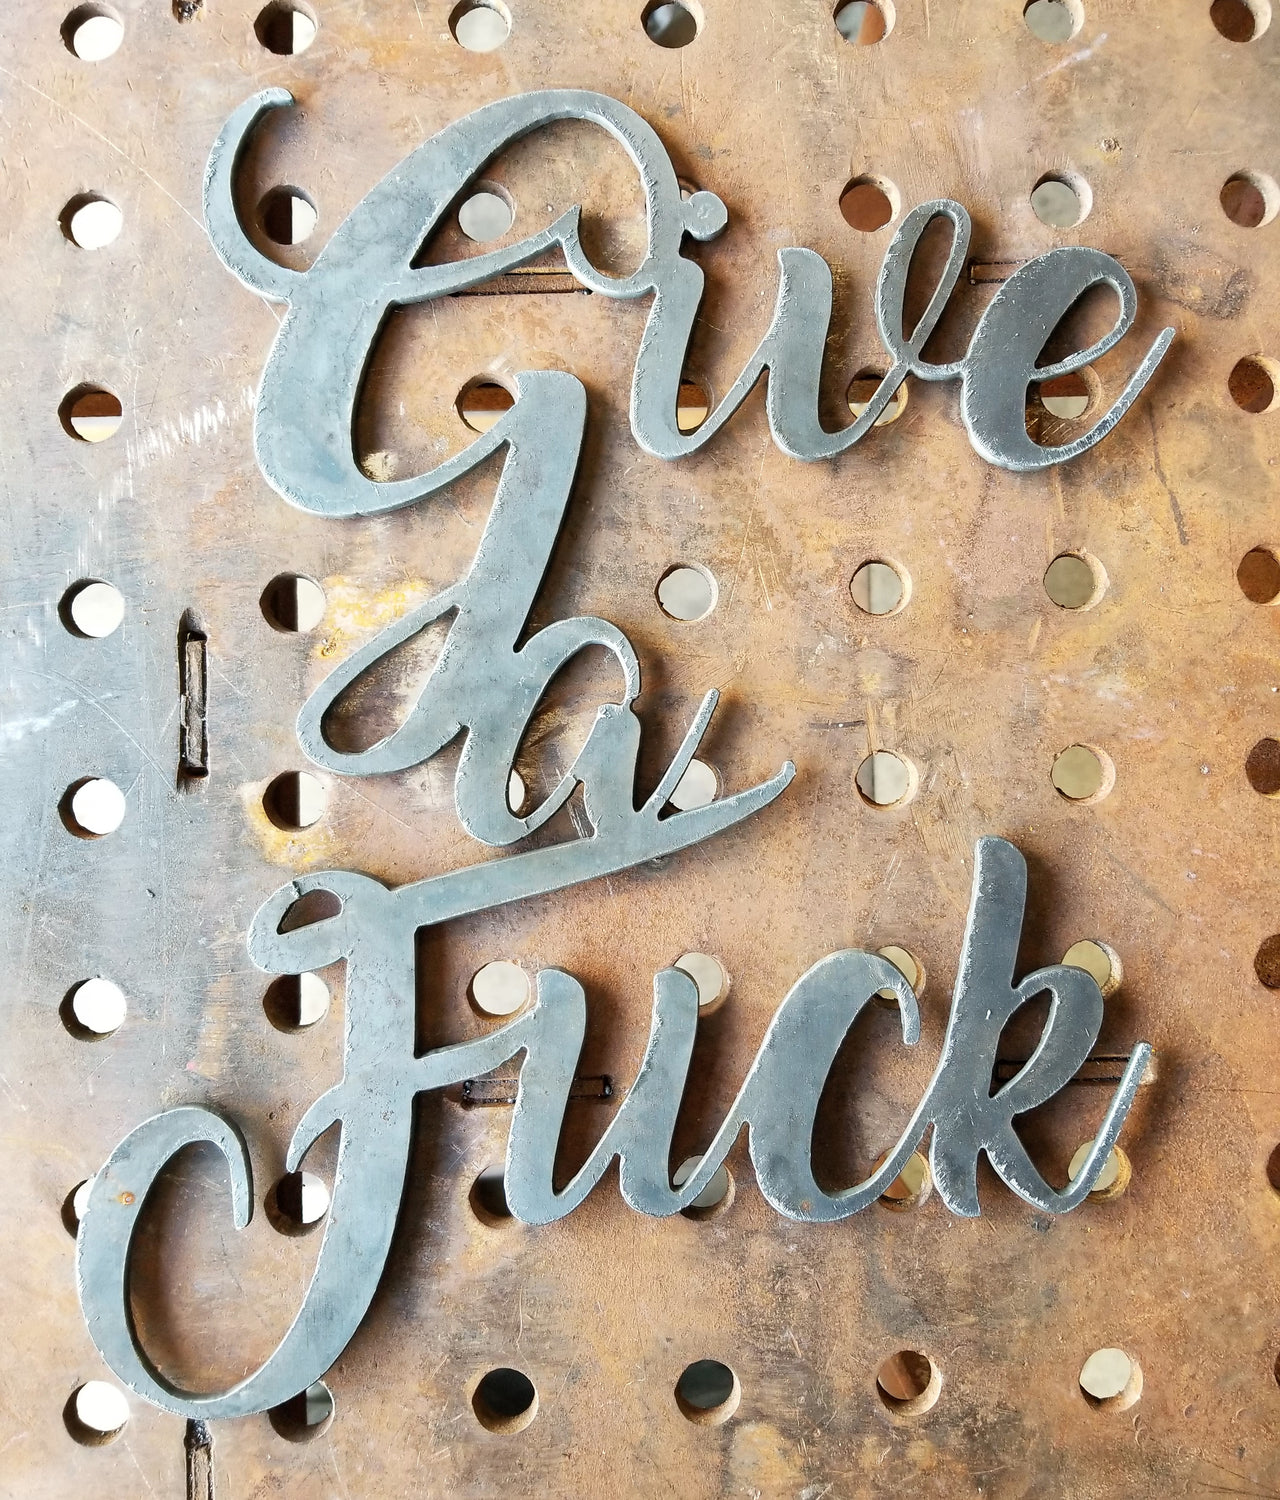 This is a personalized metal sign and reads, "Give a Fuck".